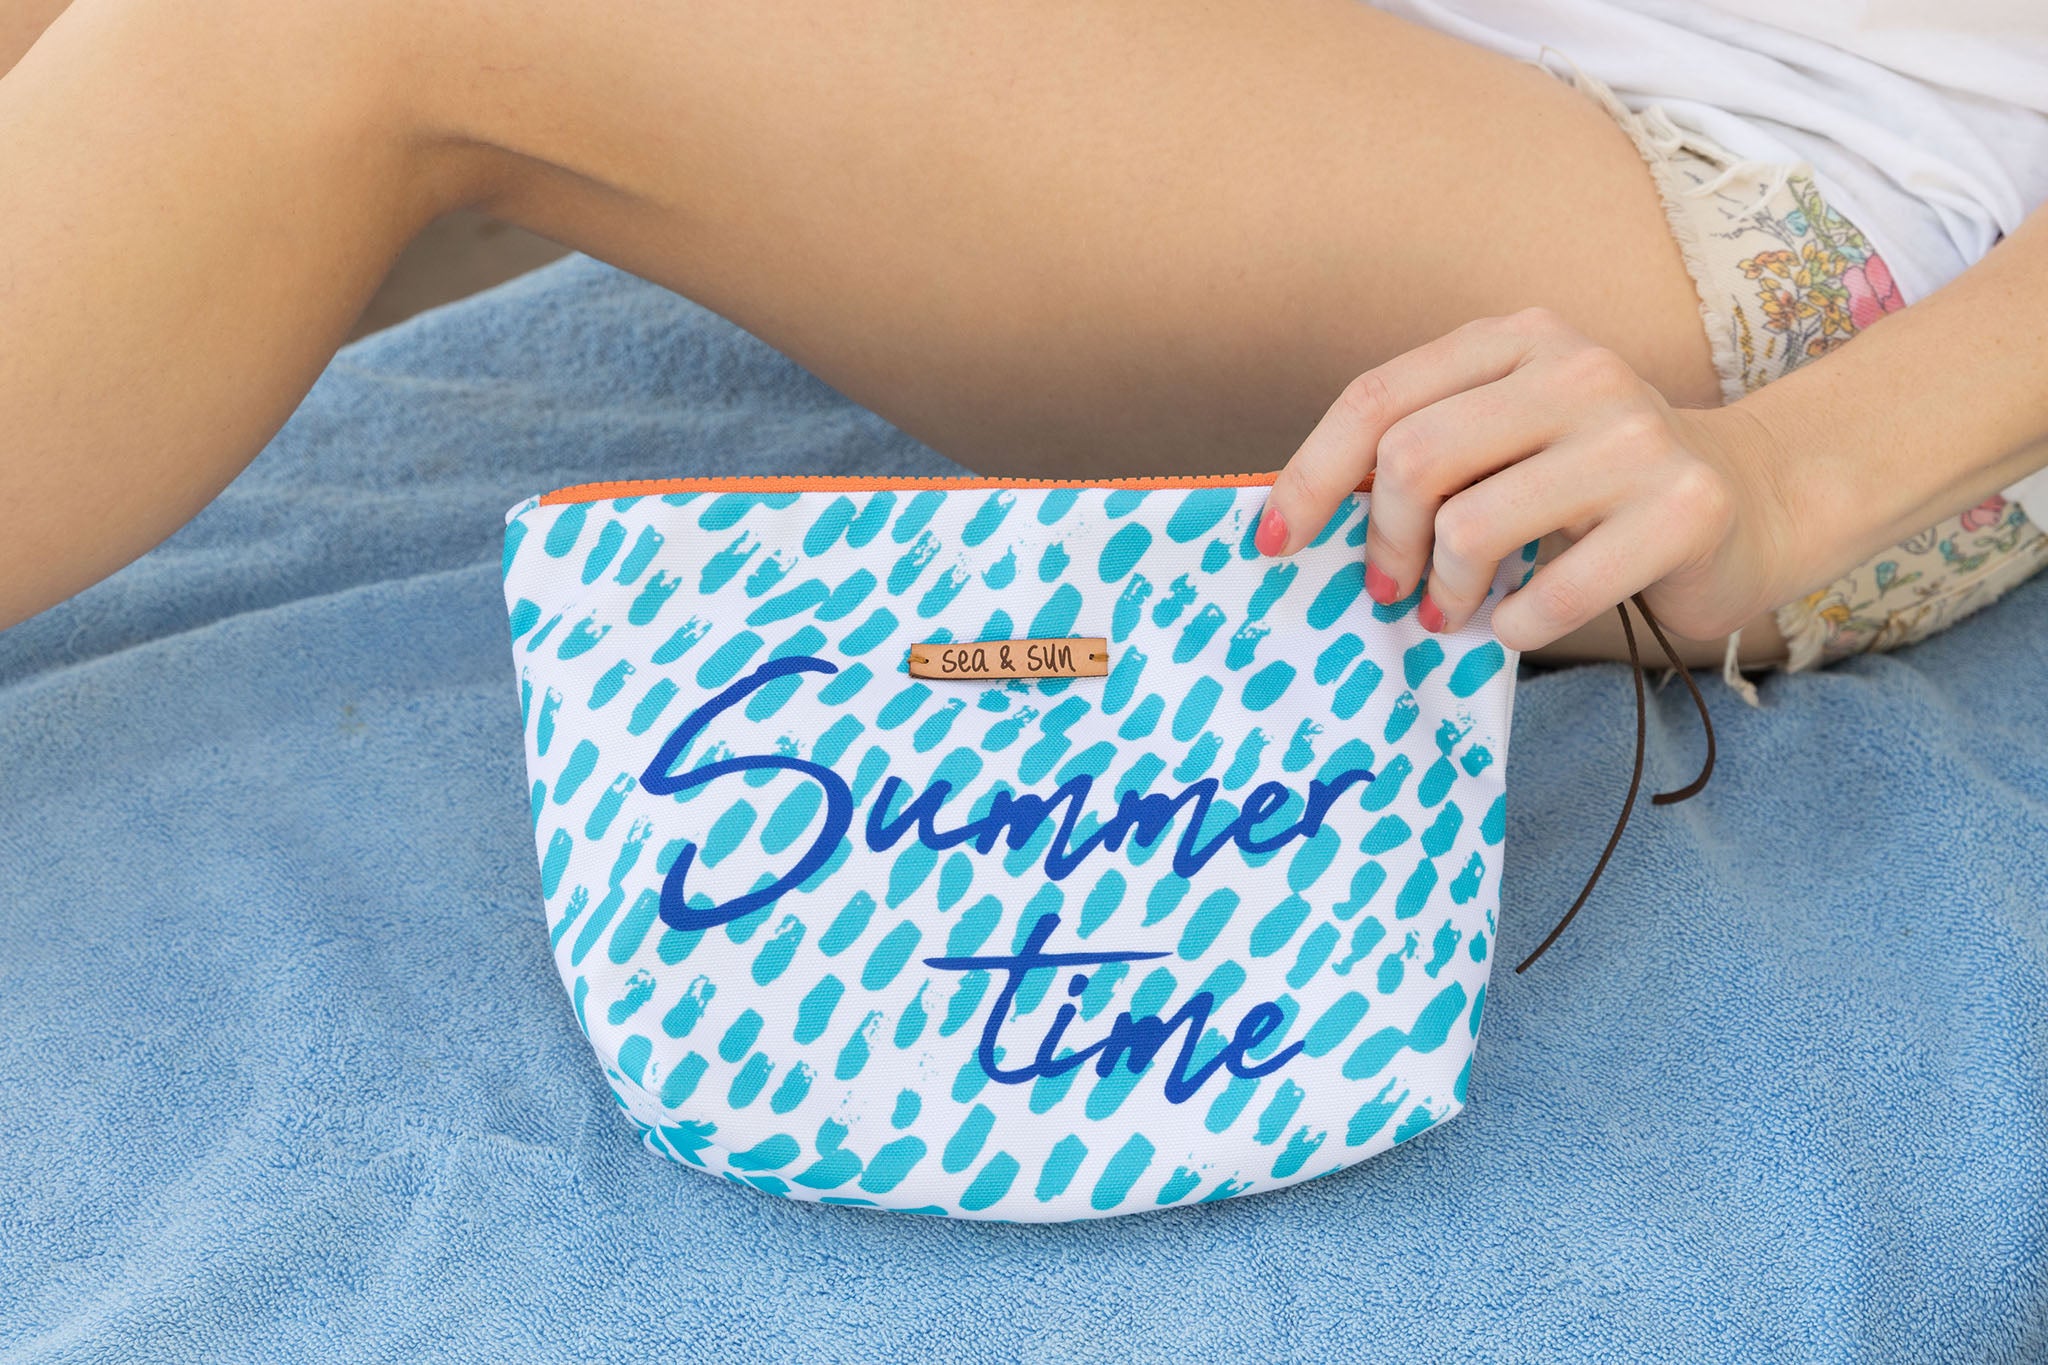 Summer Time Waterproof lined Bag for the Beach, Pool, Travel or Makeup - Kardia